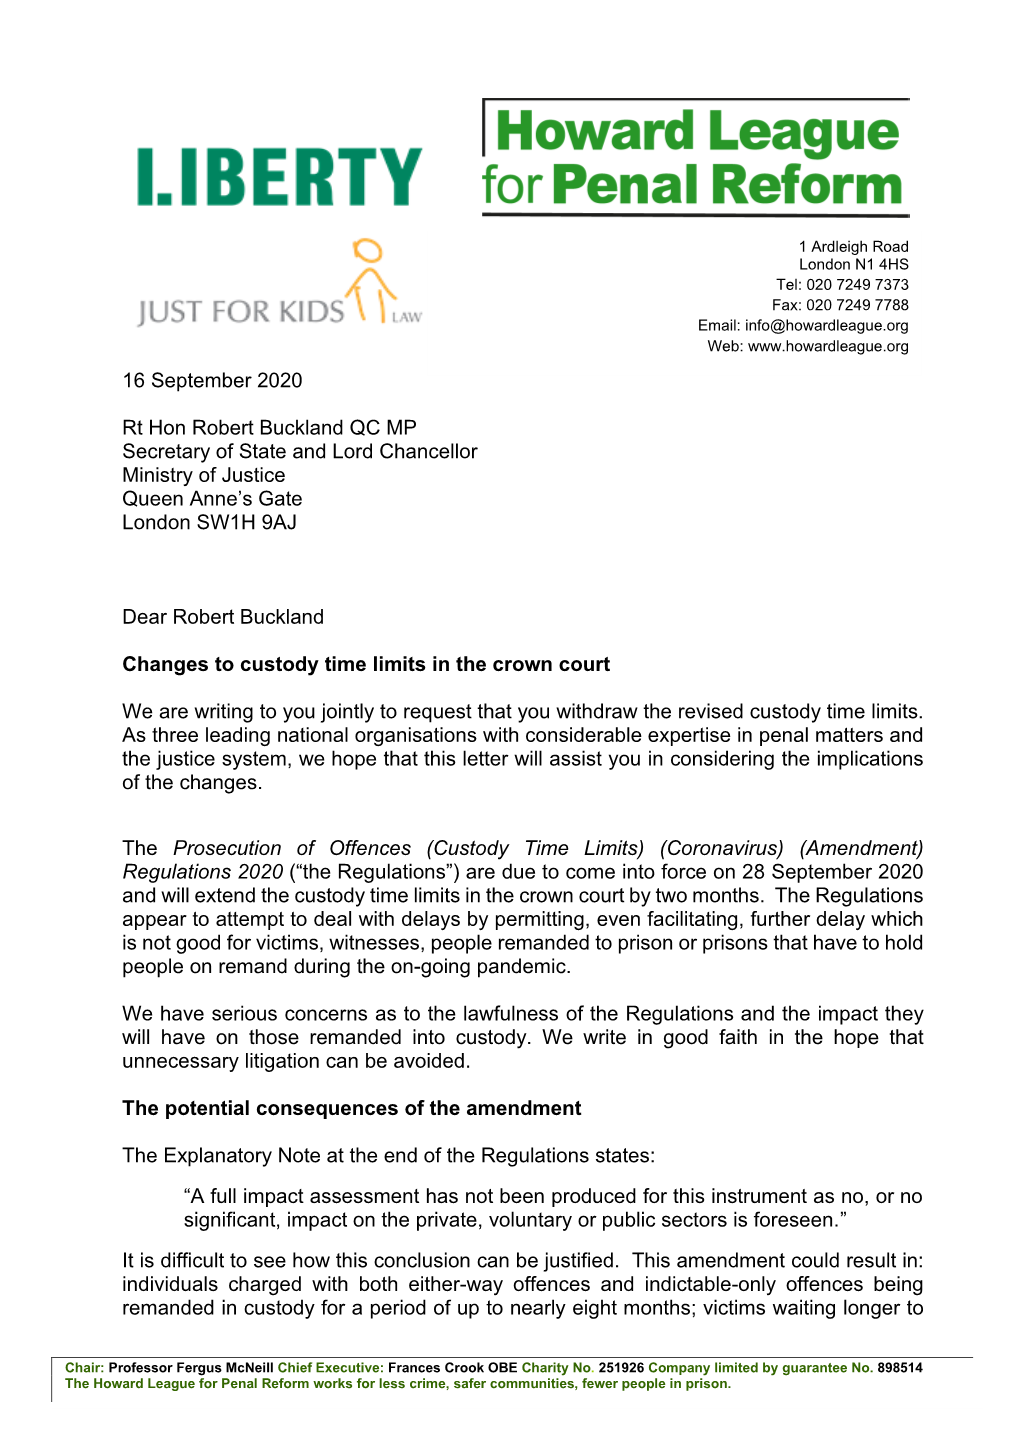 Letter to Rt Hon Robert Buckland QC MP